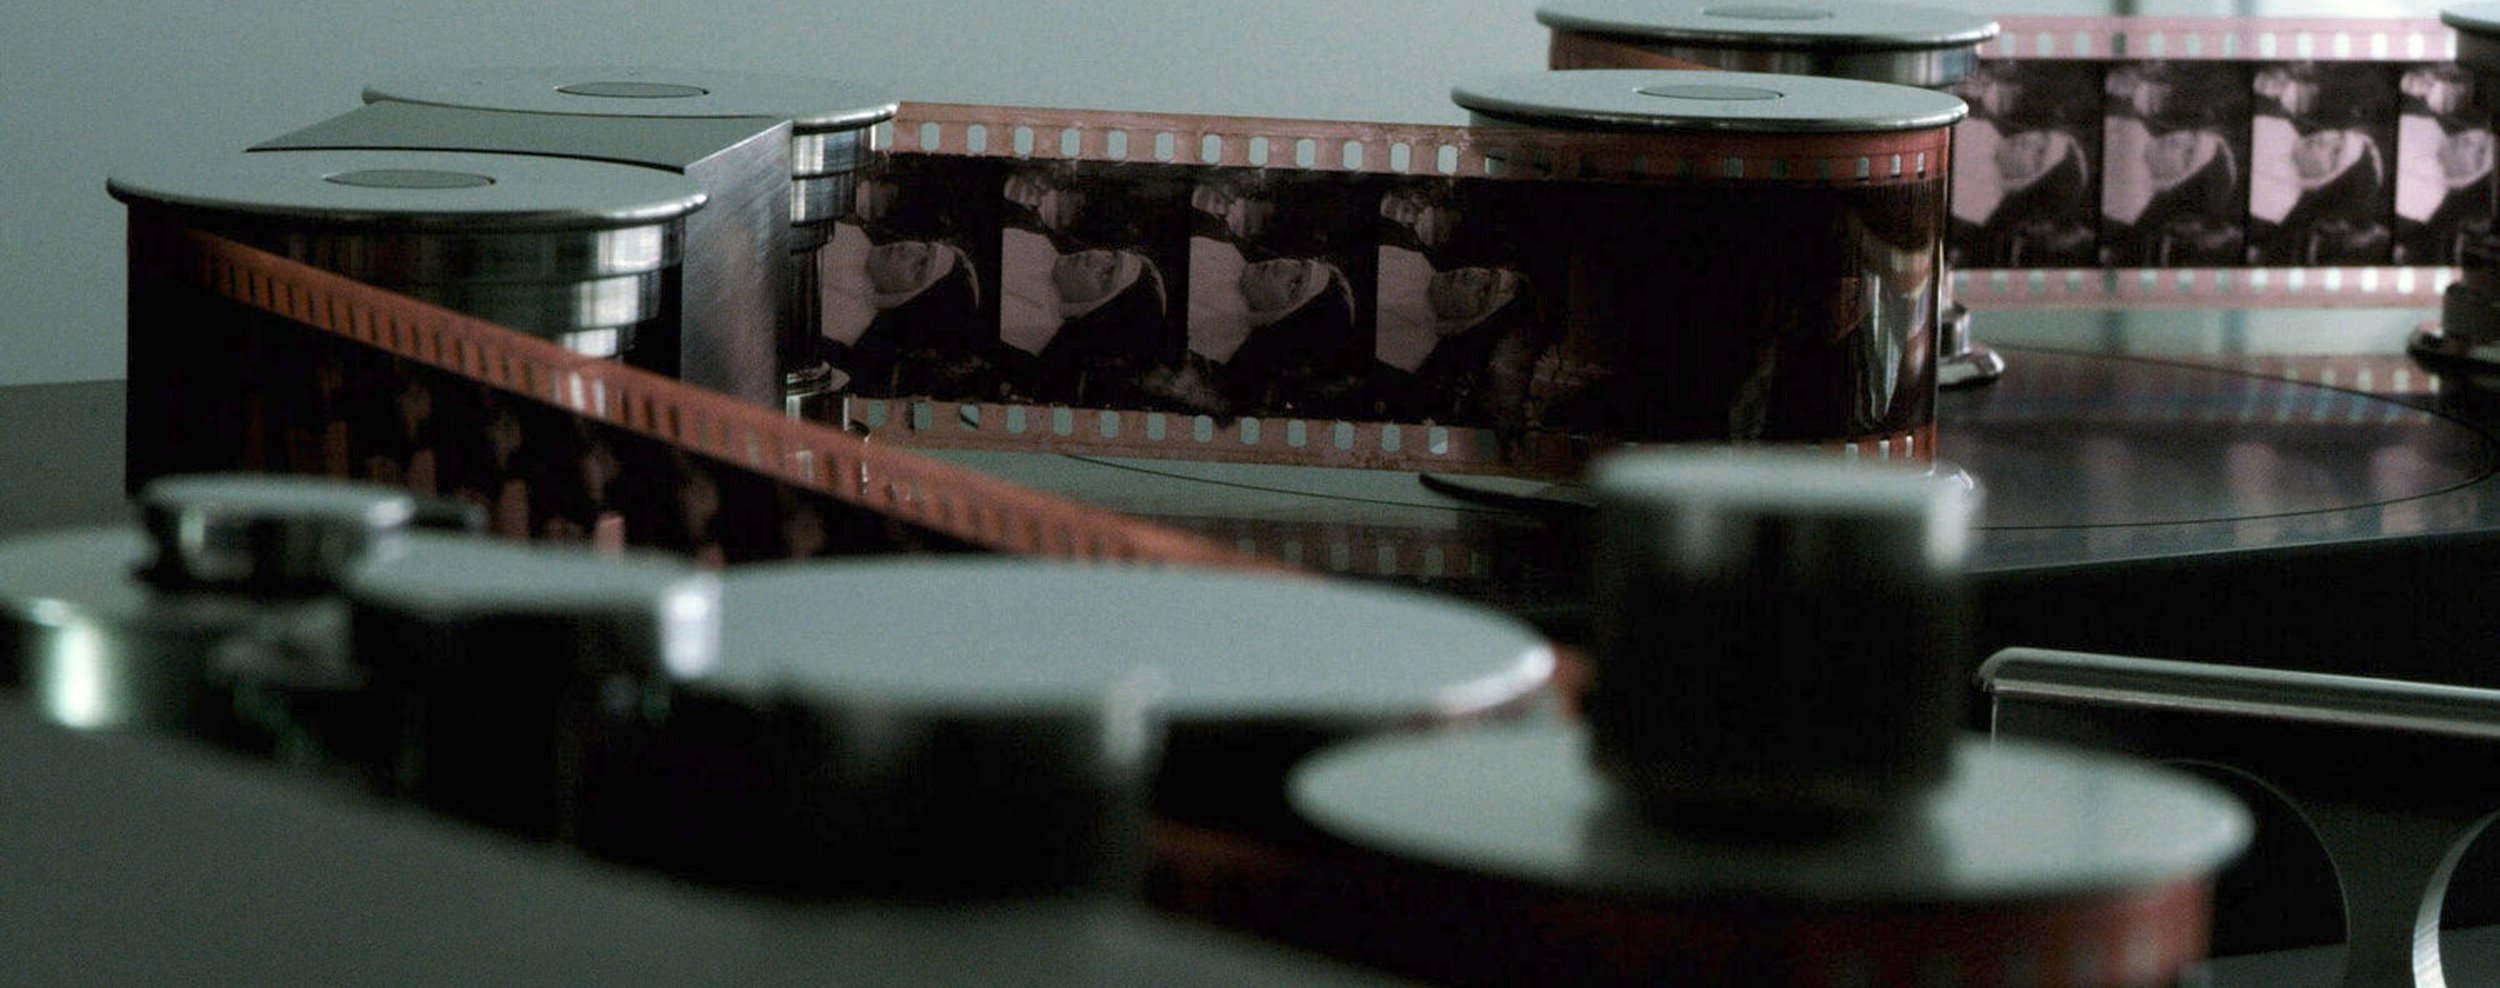 FILM, THE LIVING RECORD OF OUR MEMORY